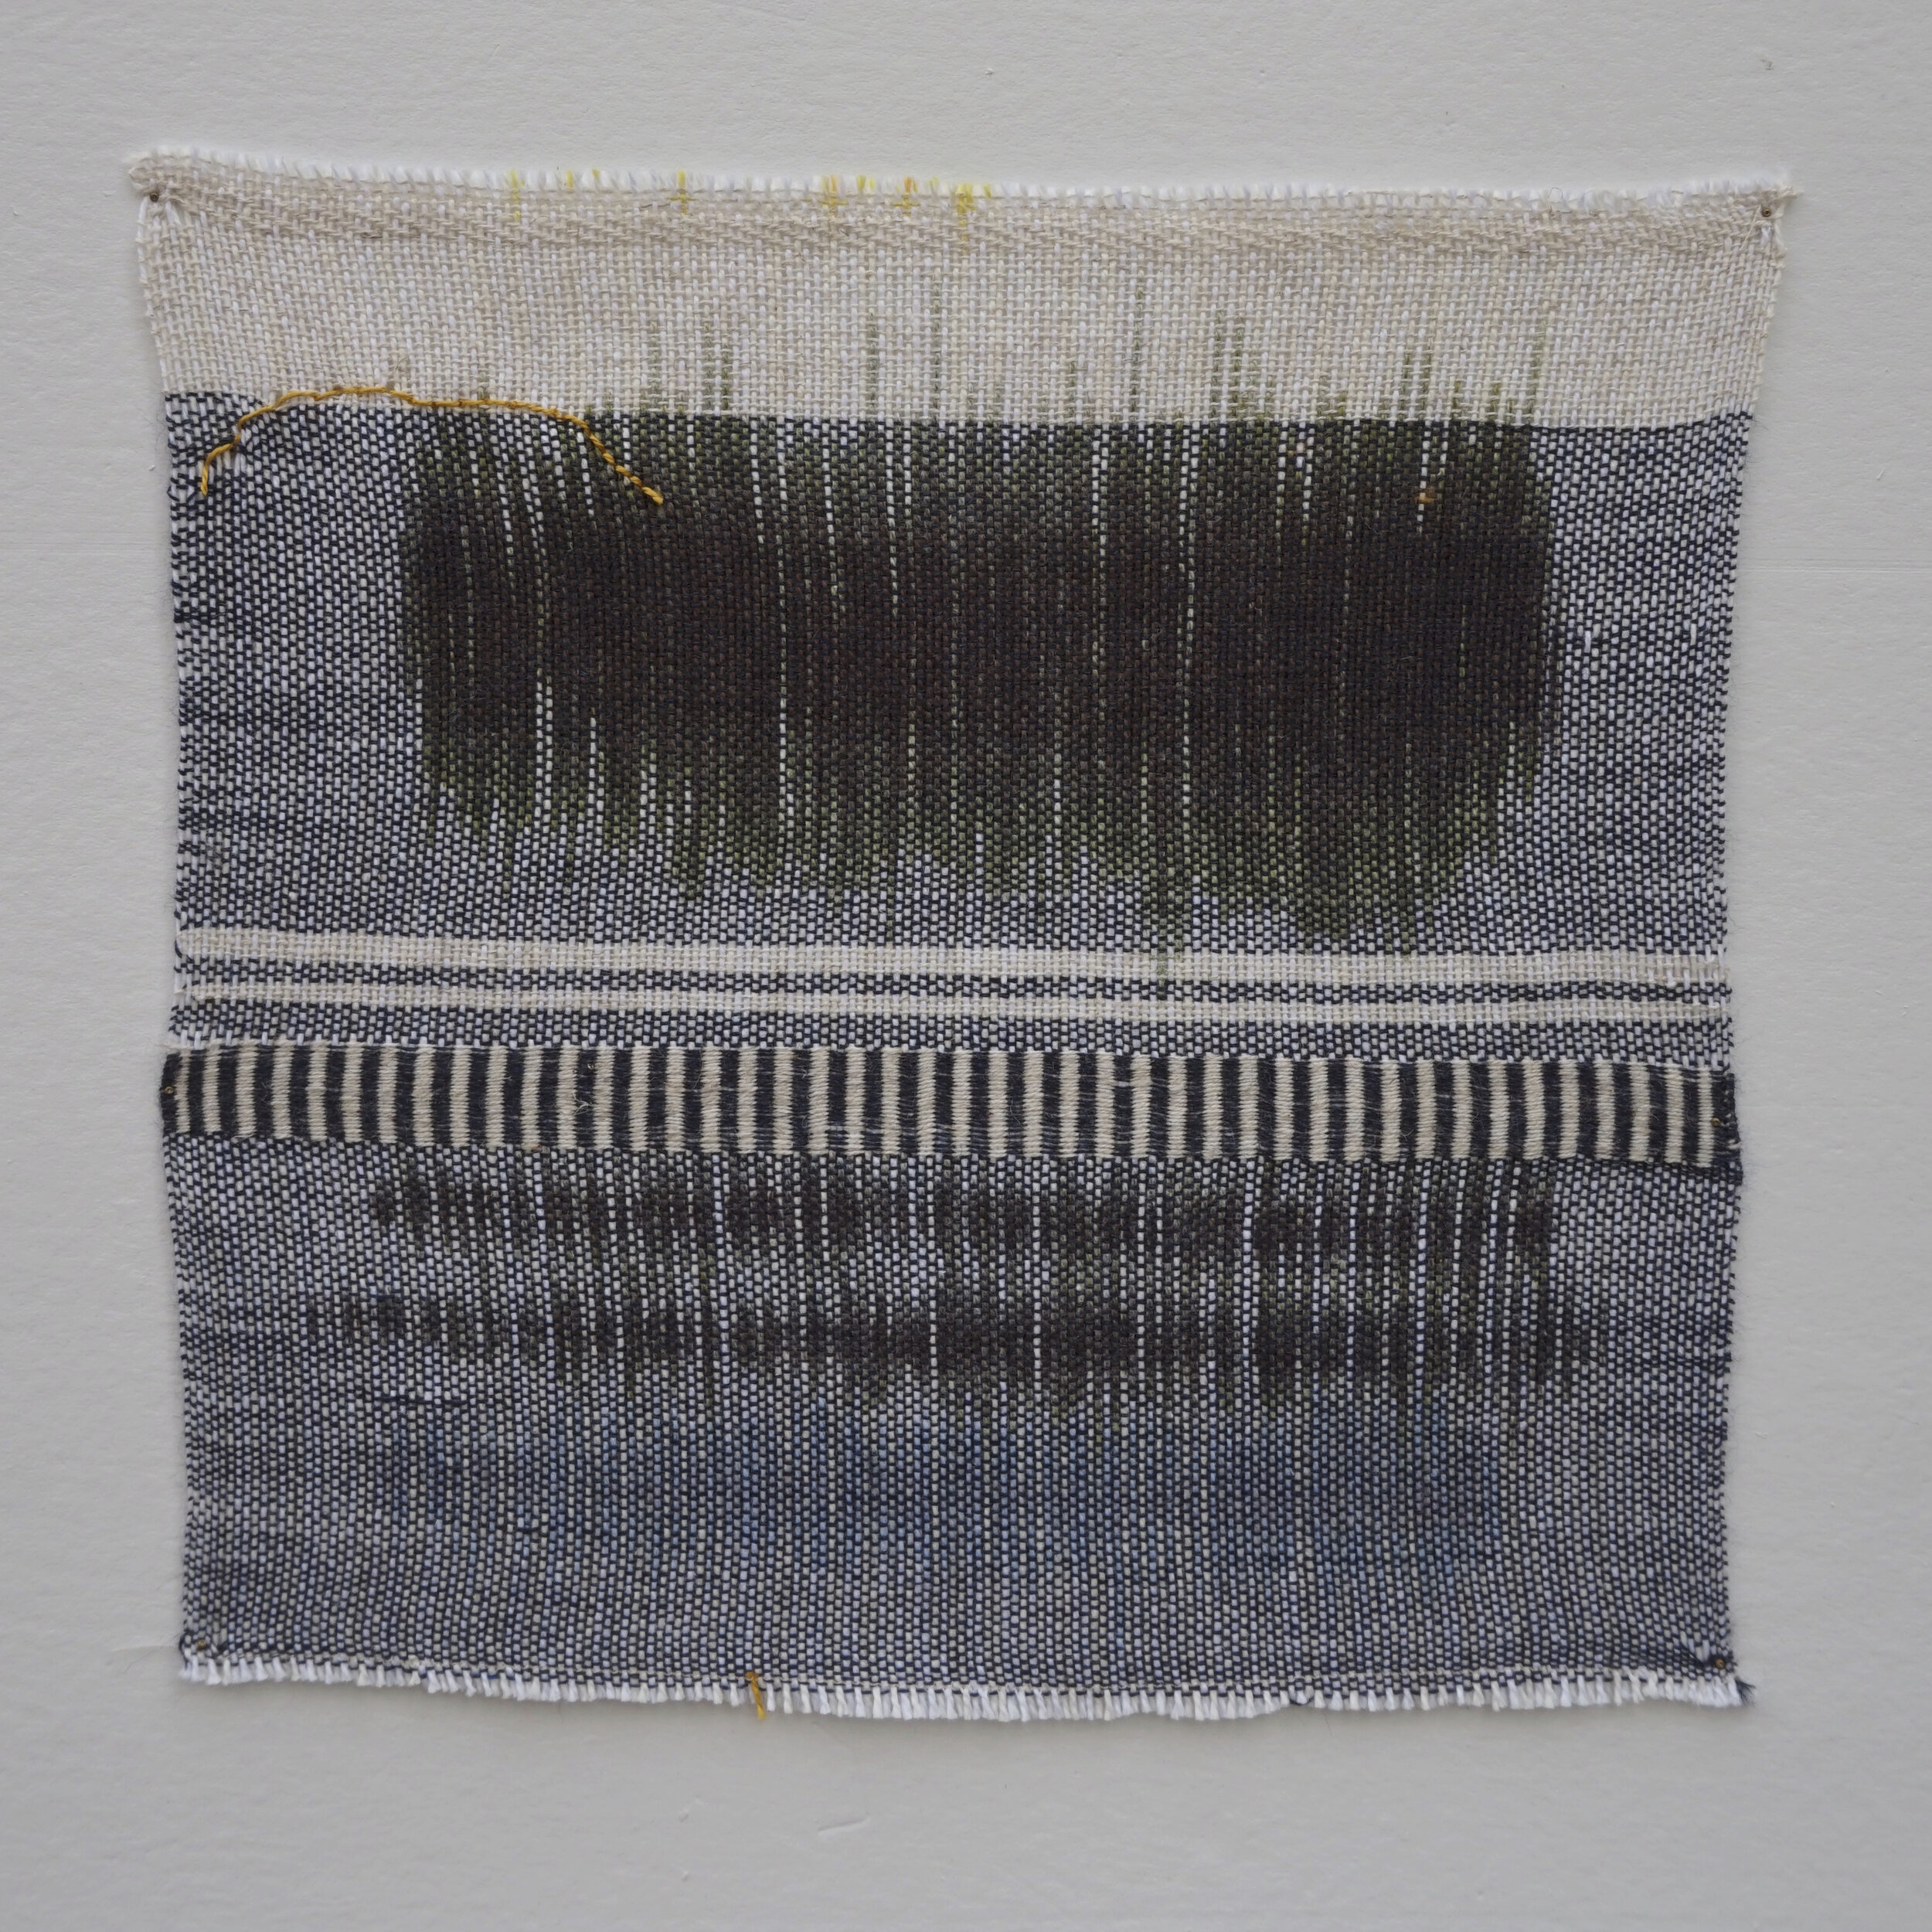 Woven Study 2, 2018, Cotton and acrylic, 10" x 10"